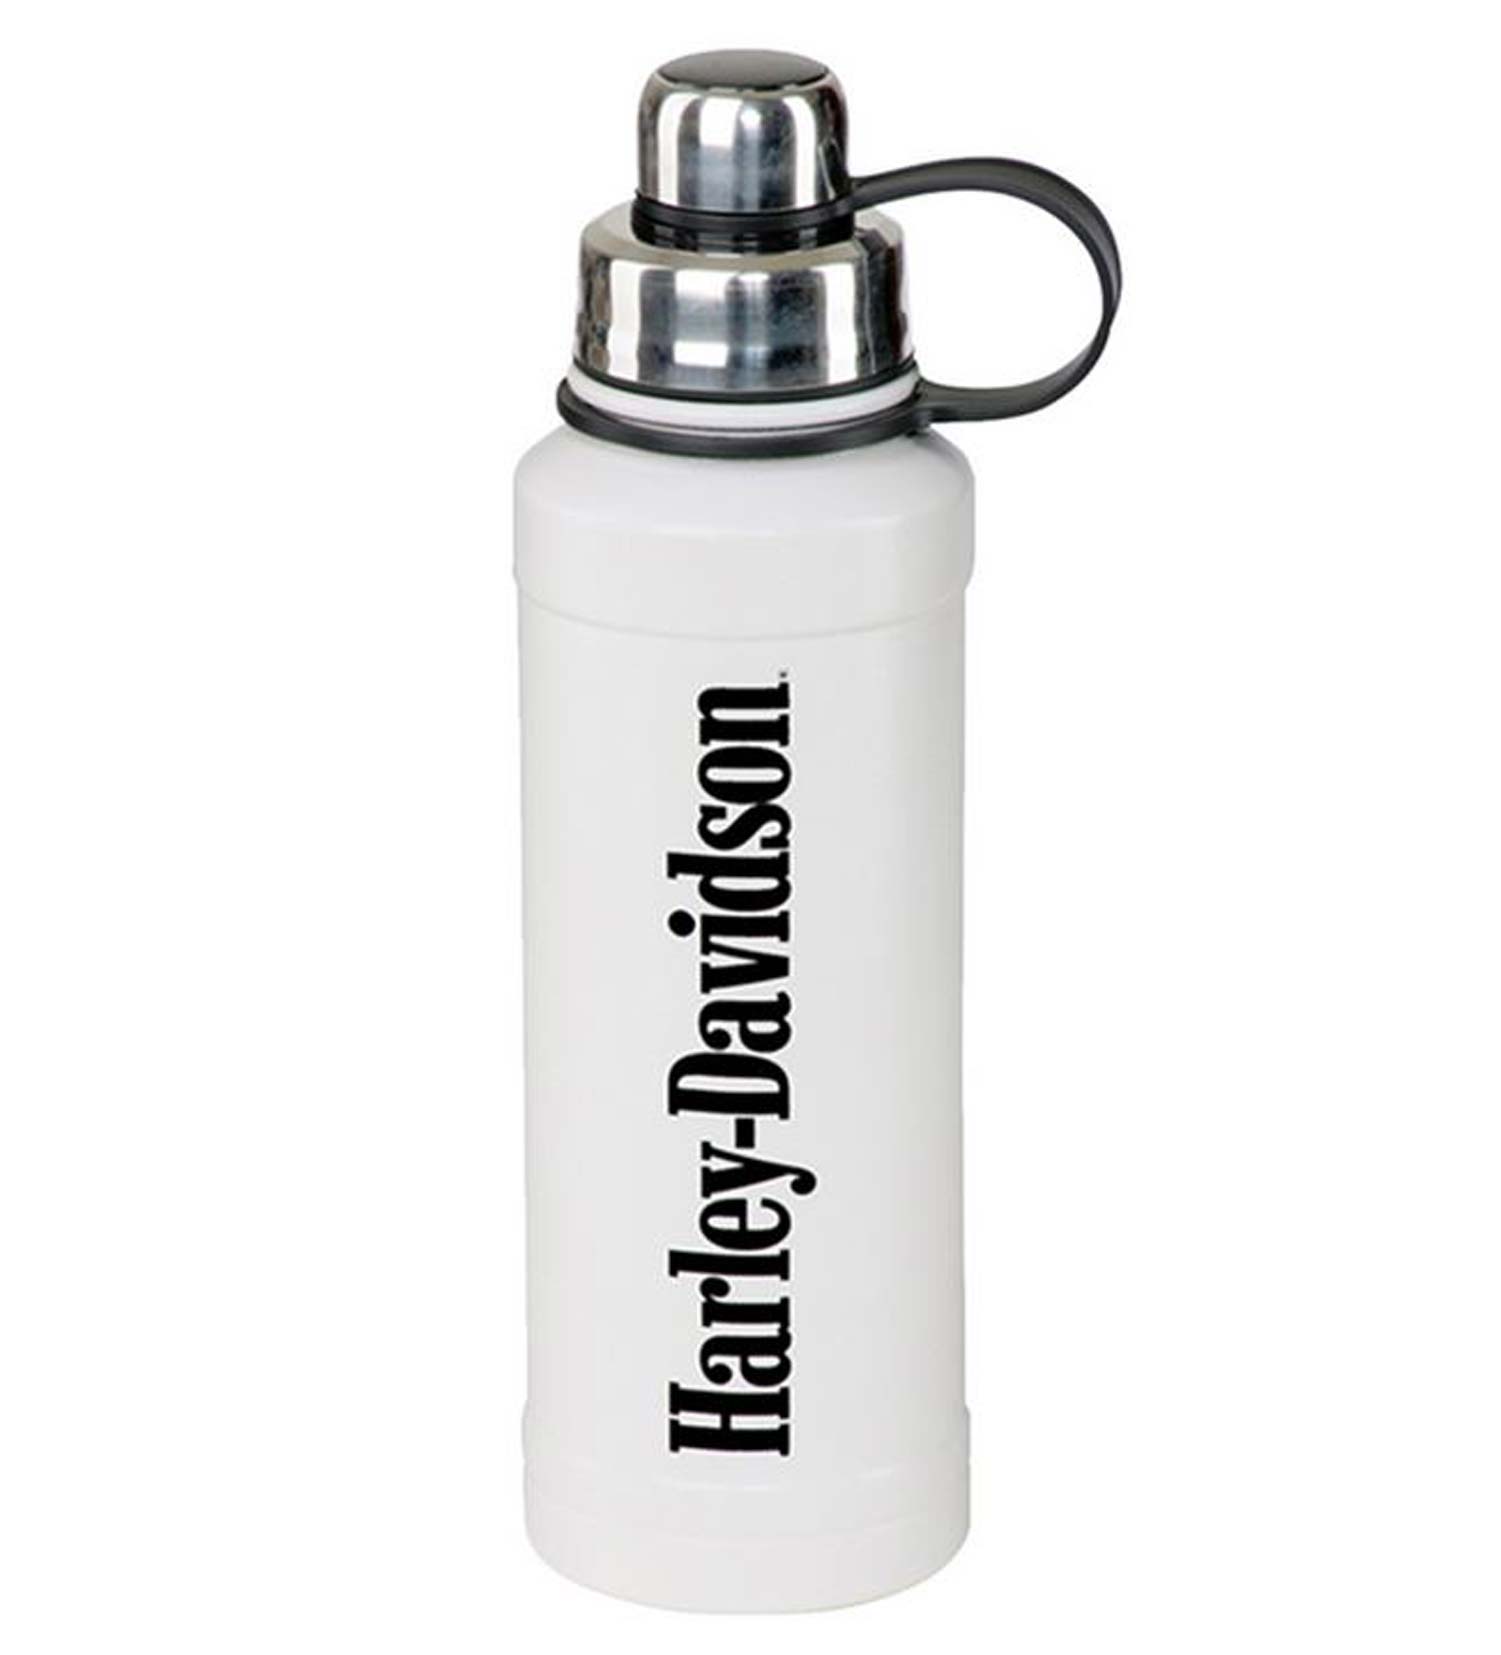 Teen boy' Insulated Stainless Steel Water Bottle